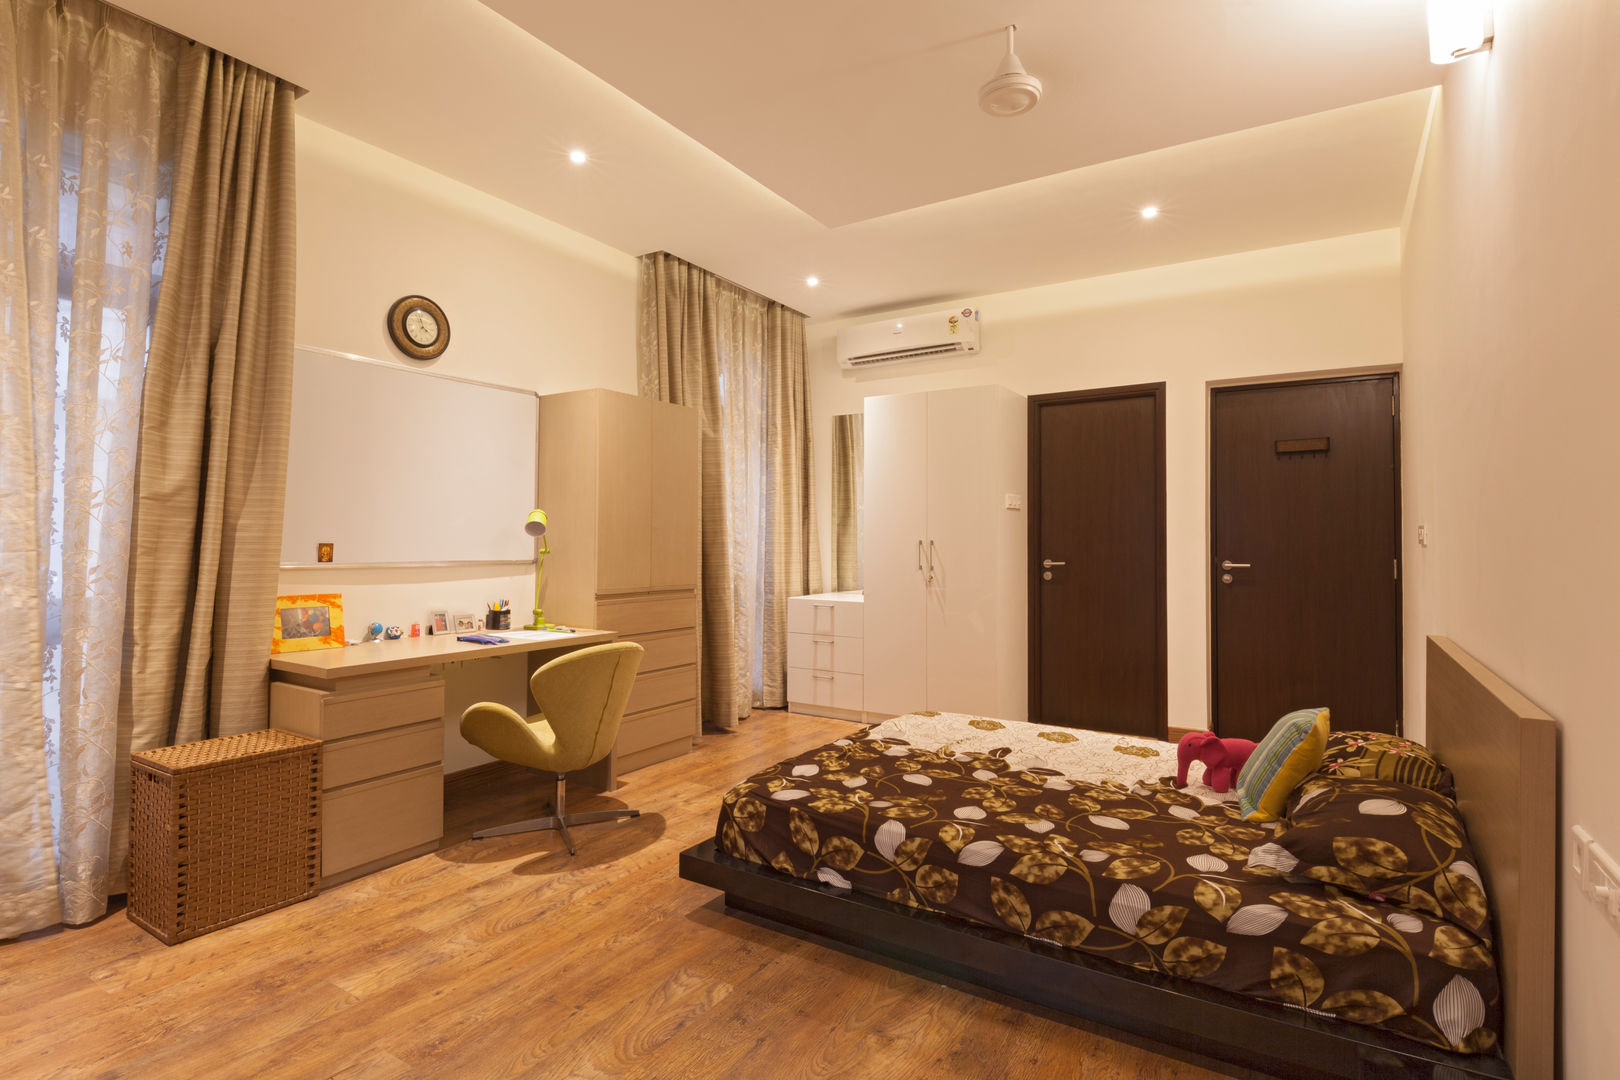 Residence No.1 at Panache, chennai, Synergy Architecture and Interiors Synergy Architecture and Interiors Modern style bedroom